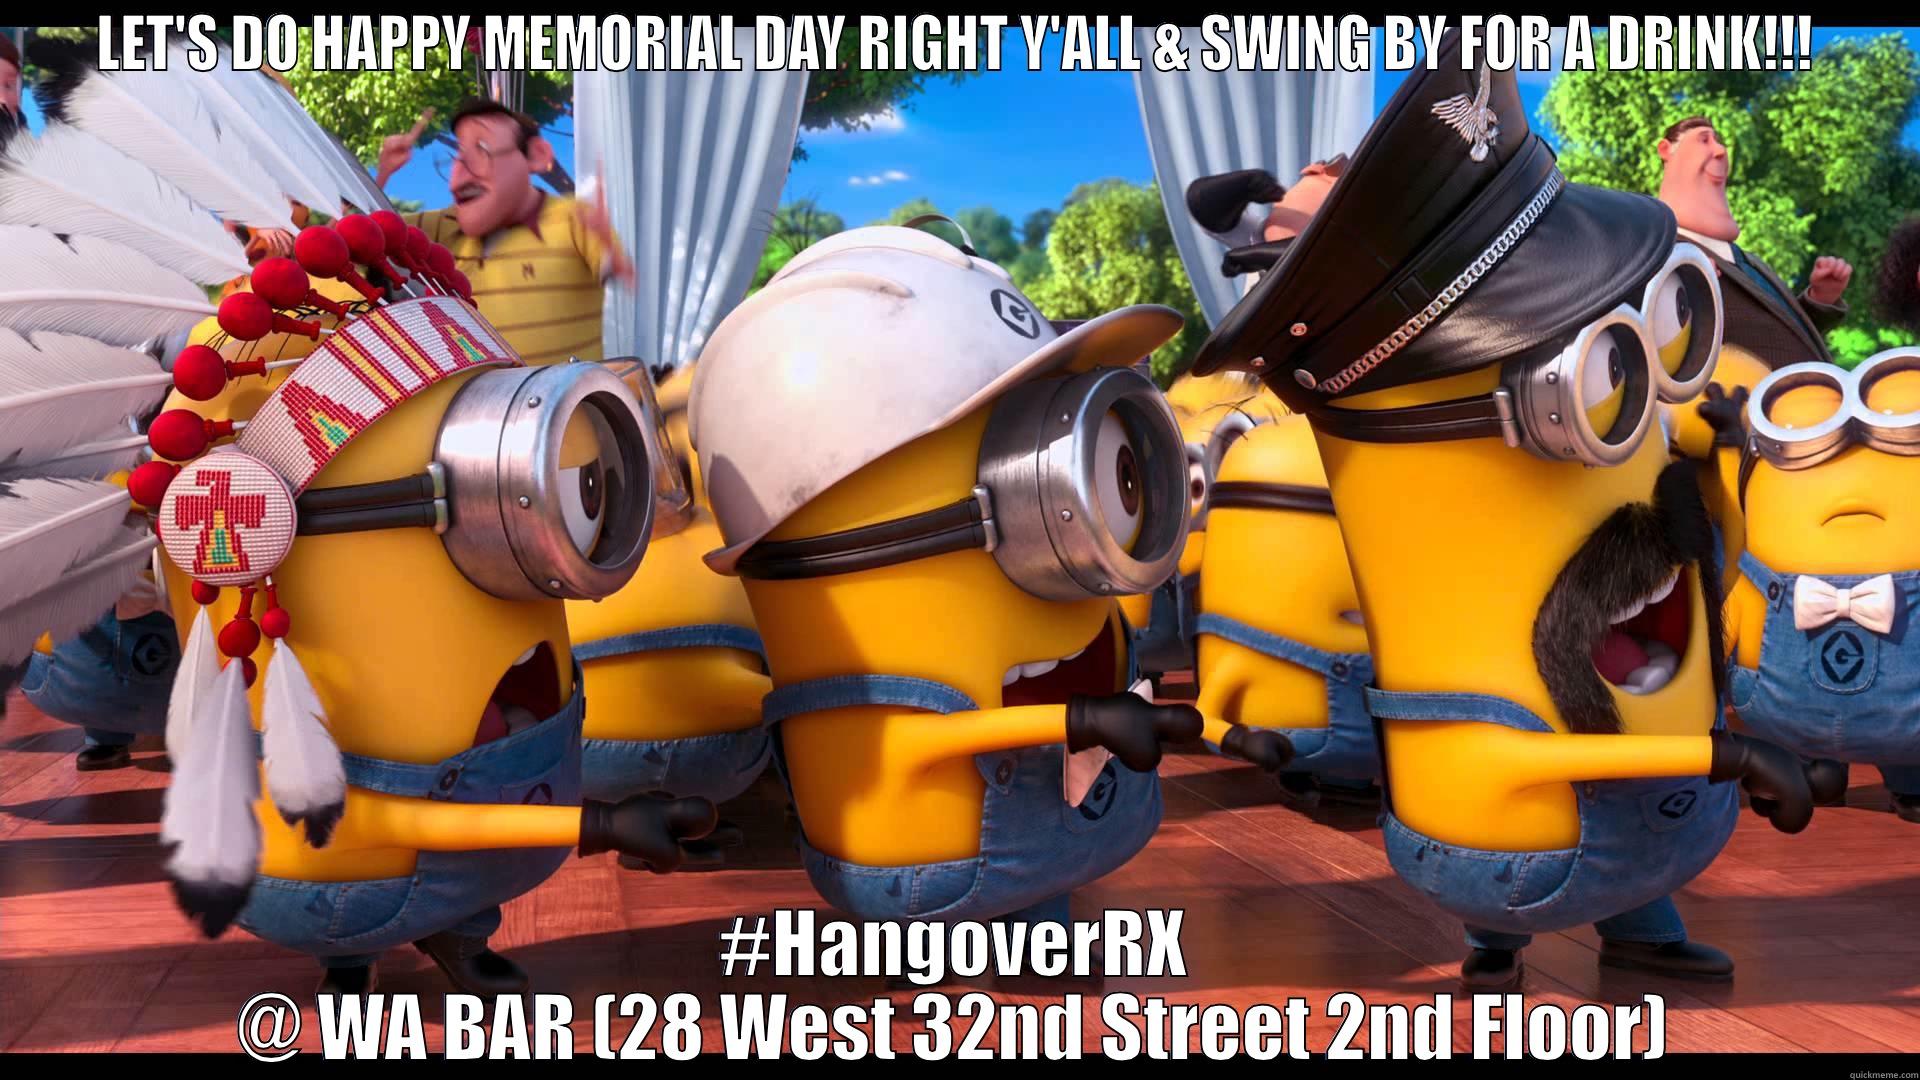 LET'S DO HAPPY MEMORIAL DAY RIGHT Y'ALL & SWING BY FOR A DRINK!!! #HANGOVERRX @ WA BAR (28 WEST 32ND STREET 2ND FLOOR) Misc